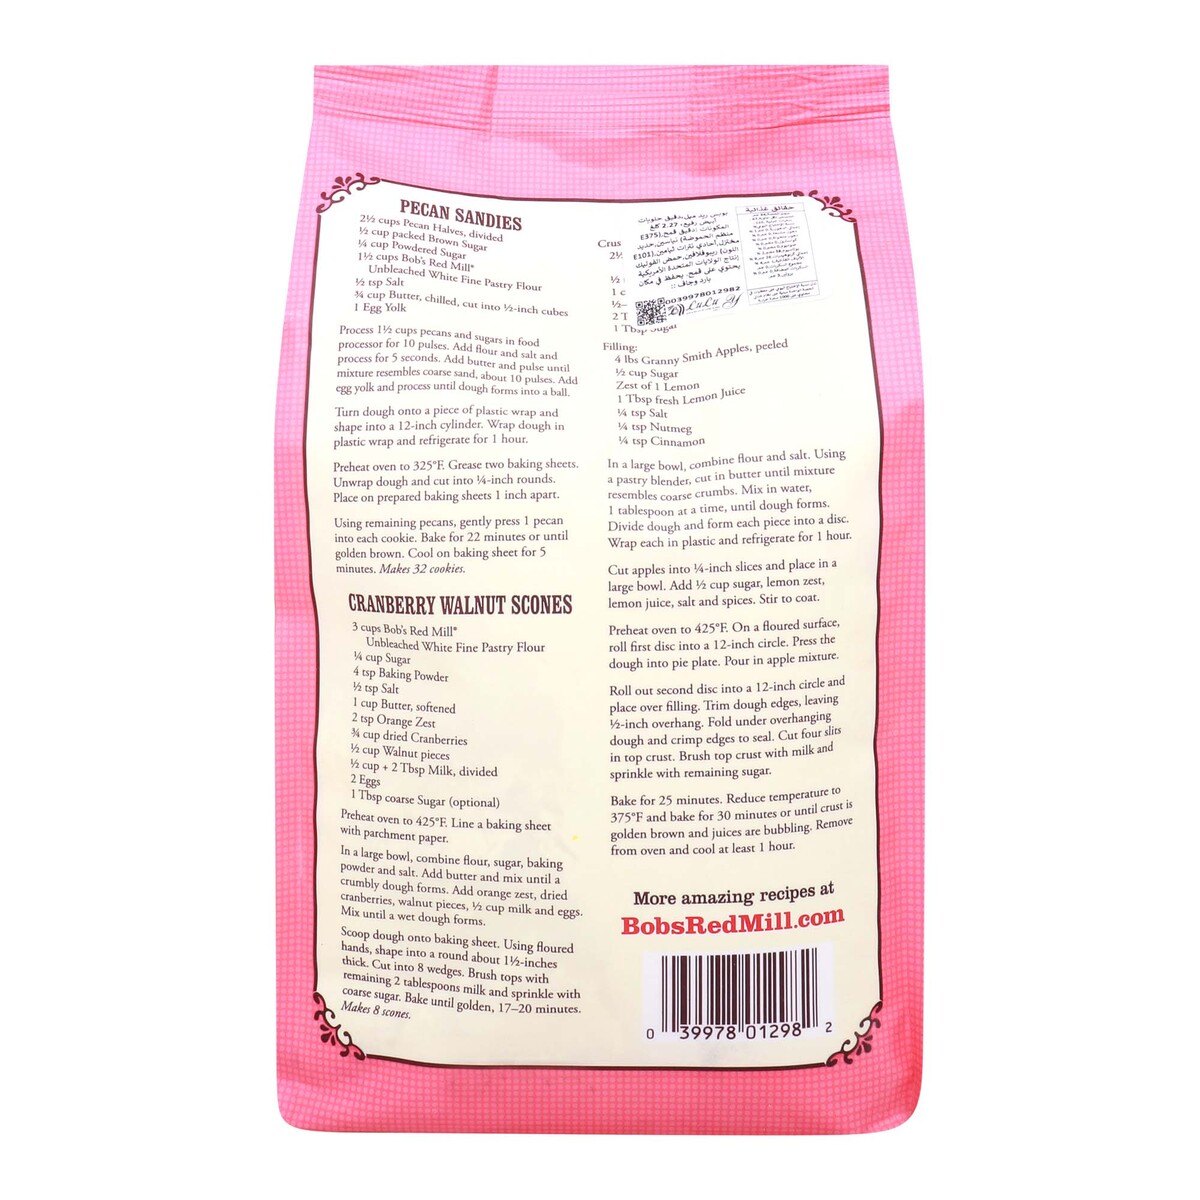 Bob's Red Mill Unbleached White Fine Pastry Flour 2.27 kg